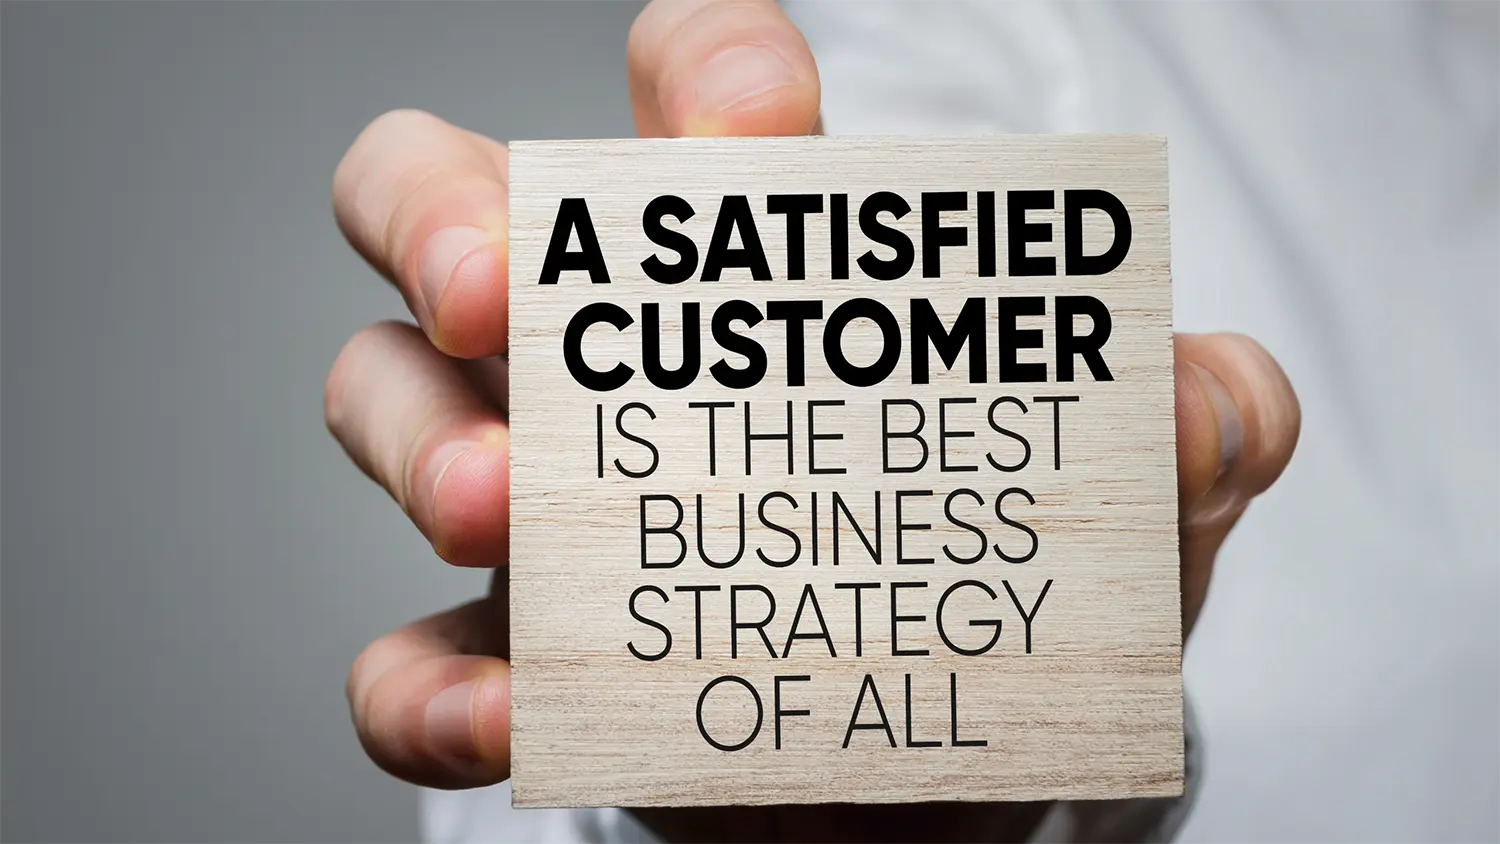 Image of a Hand Holding a Block with the Phrase &quot;A Satisfied Customer is the Best Business Strategy of All&quot;